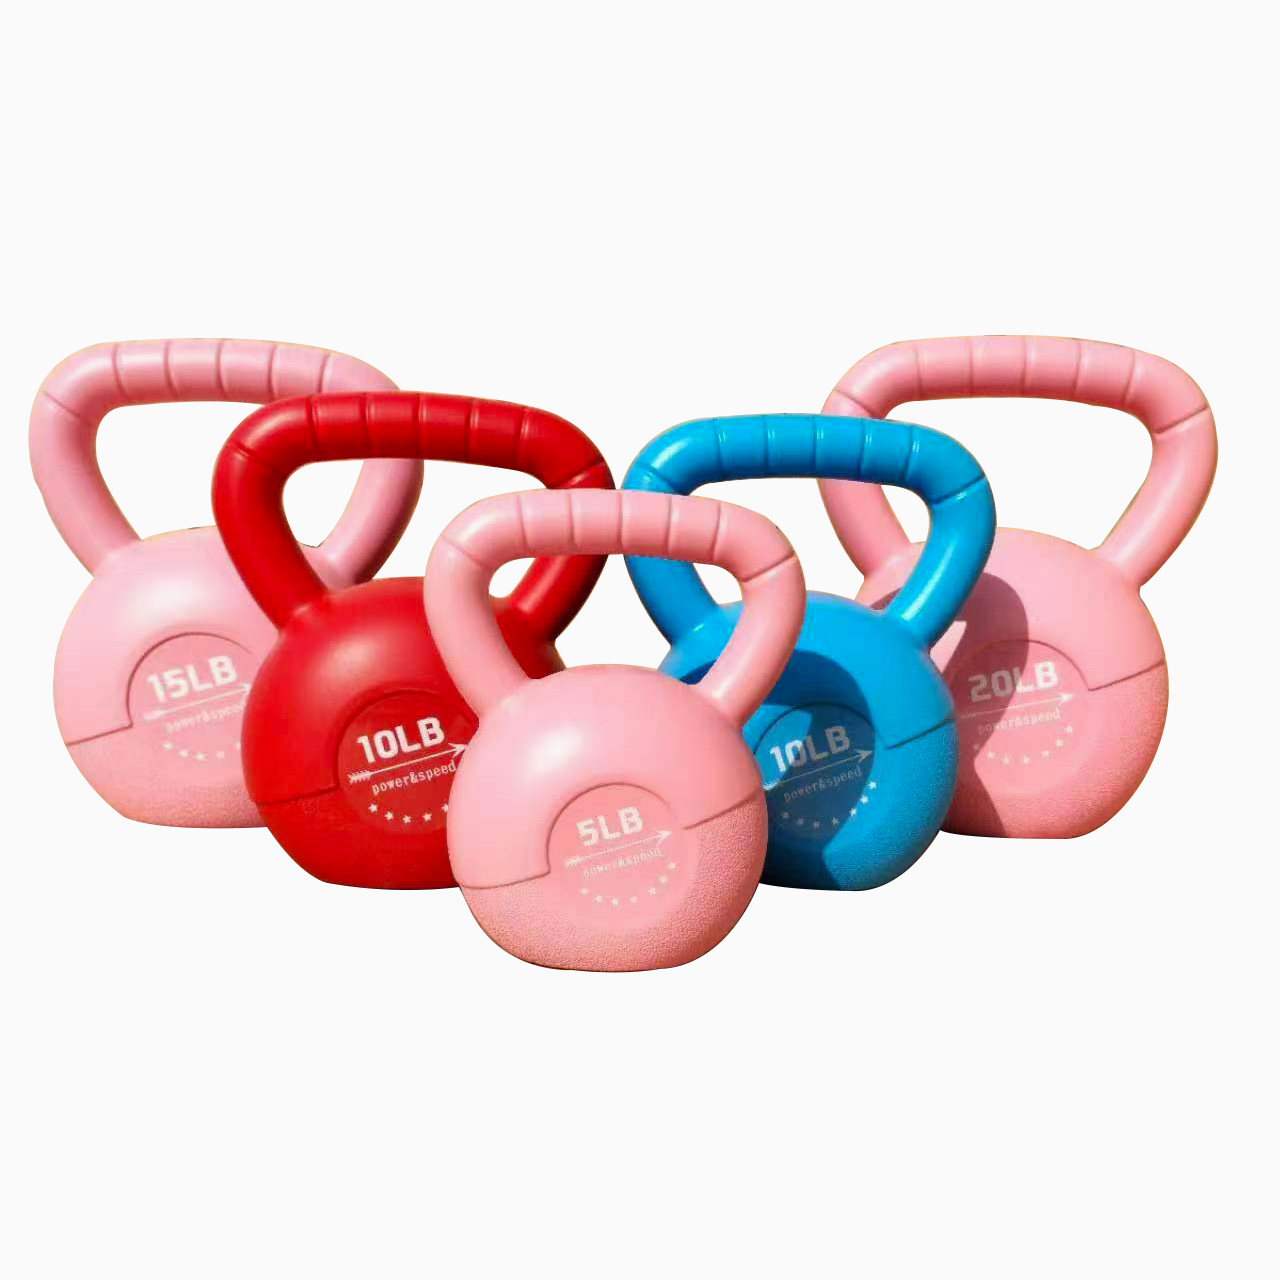 China Wholesale Kettle Bell Set Training Suppliers - factory wholesale cheap 2kg cement kettlebell fitness workout weight training low price – Hongyu